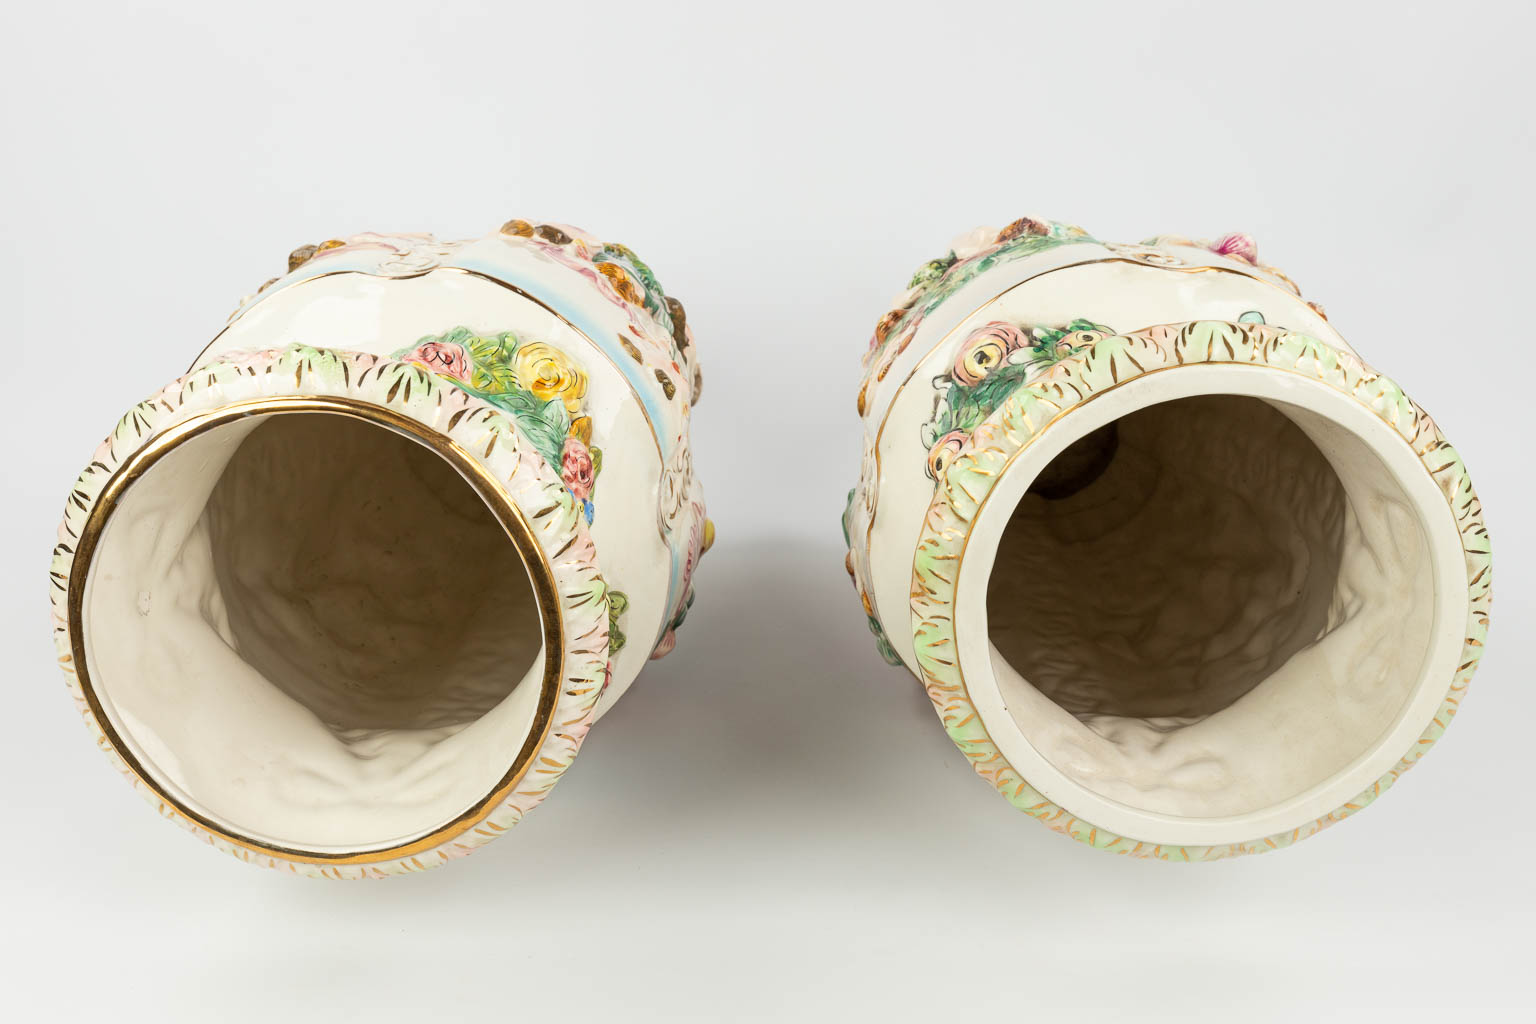 Capodimonte, a collection of 2 large vases (58 x 30cm) - Image 9 of 18